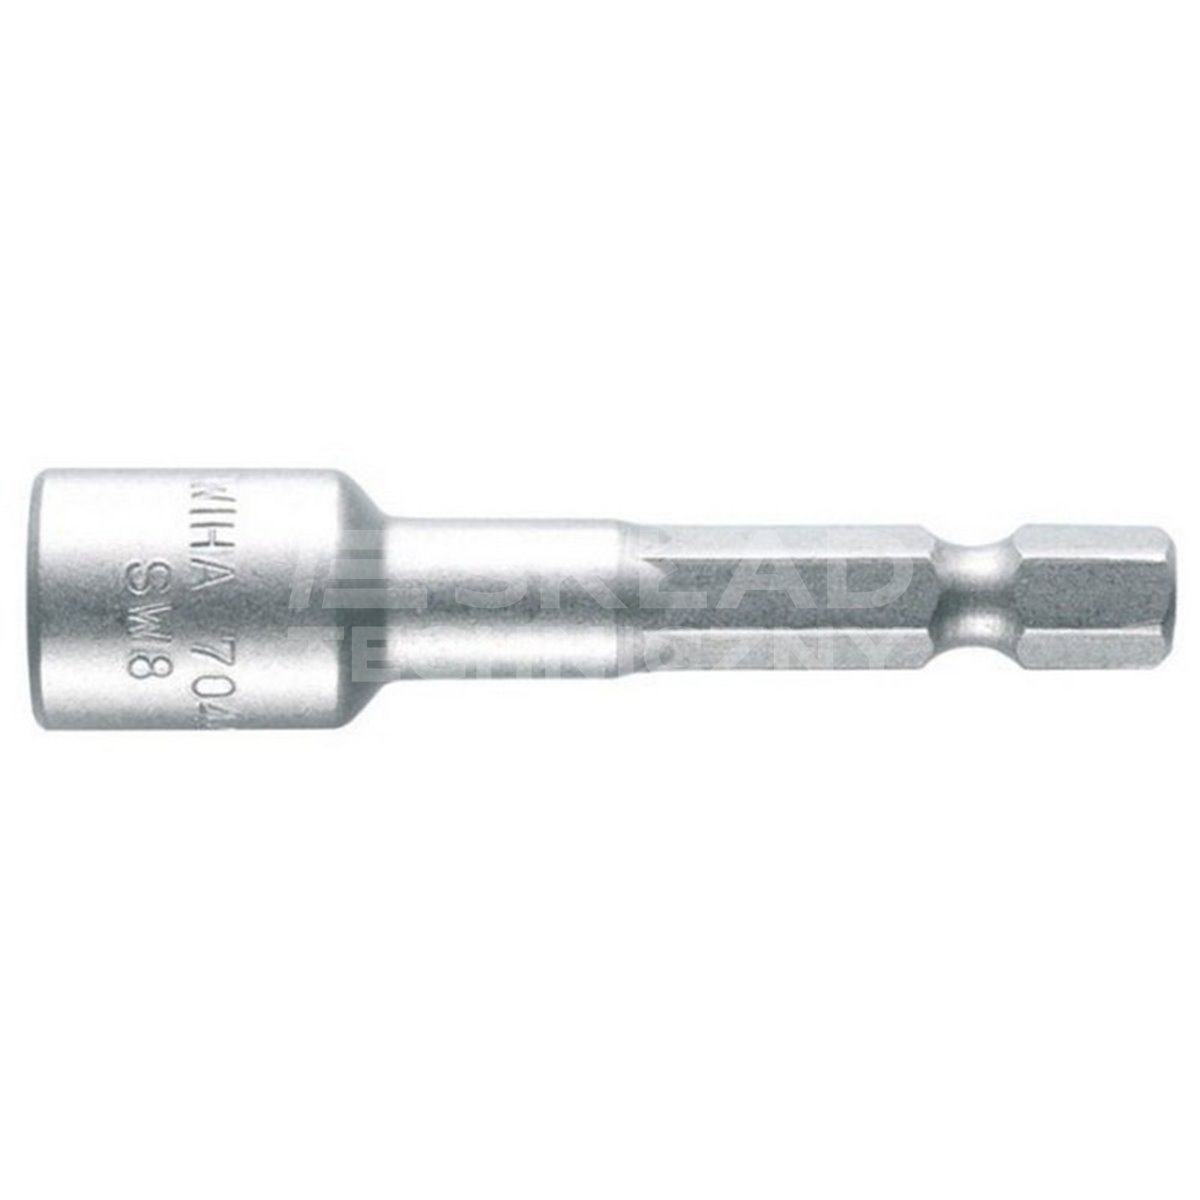 Wiha 04633 Standard Bit Socket Attachment, Magnetic, E-Shaped, 6.3mm and 8.0mm sizes.